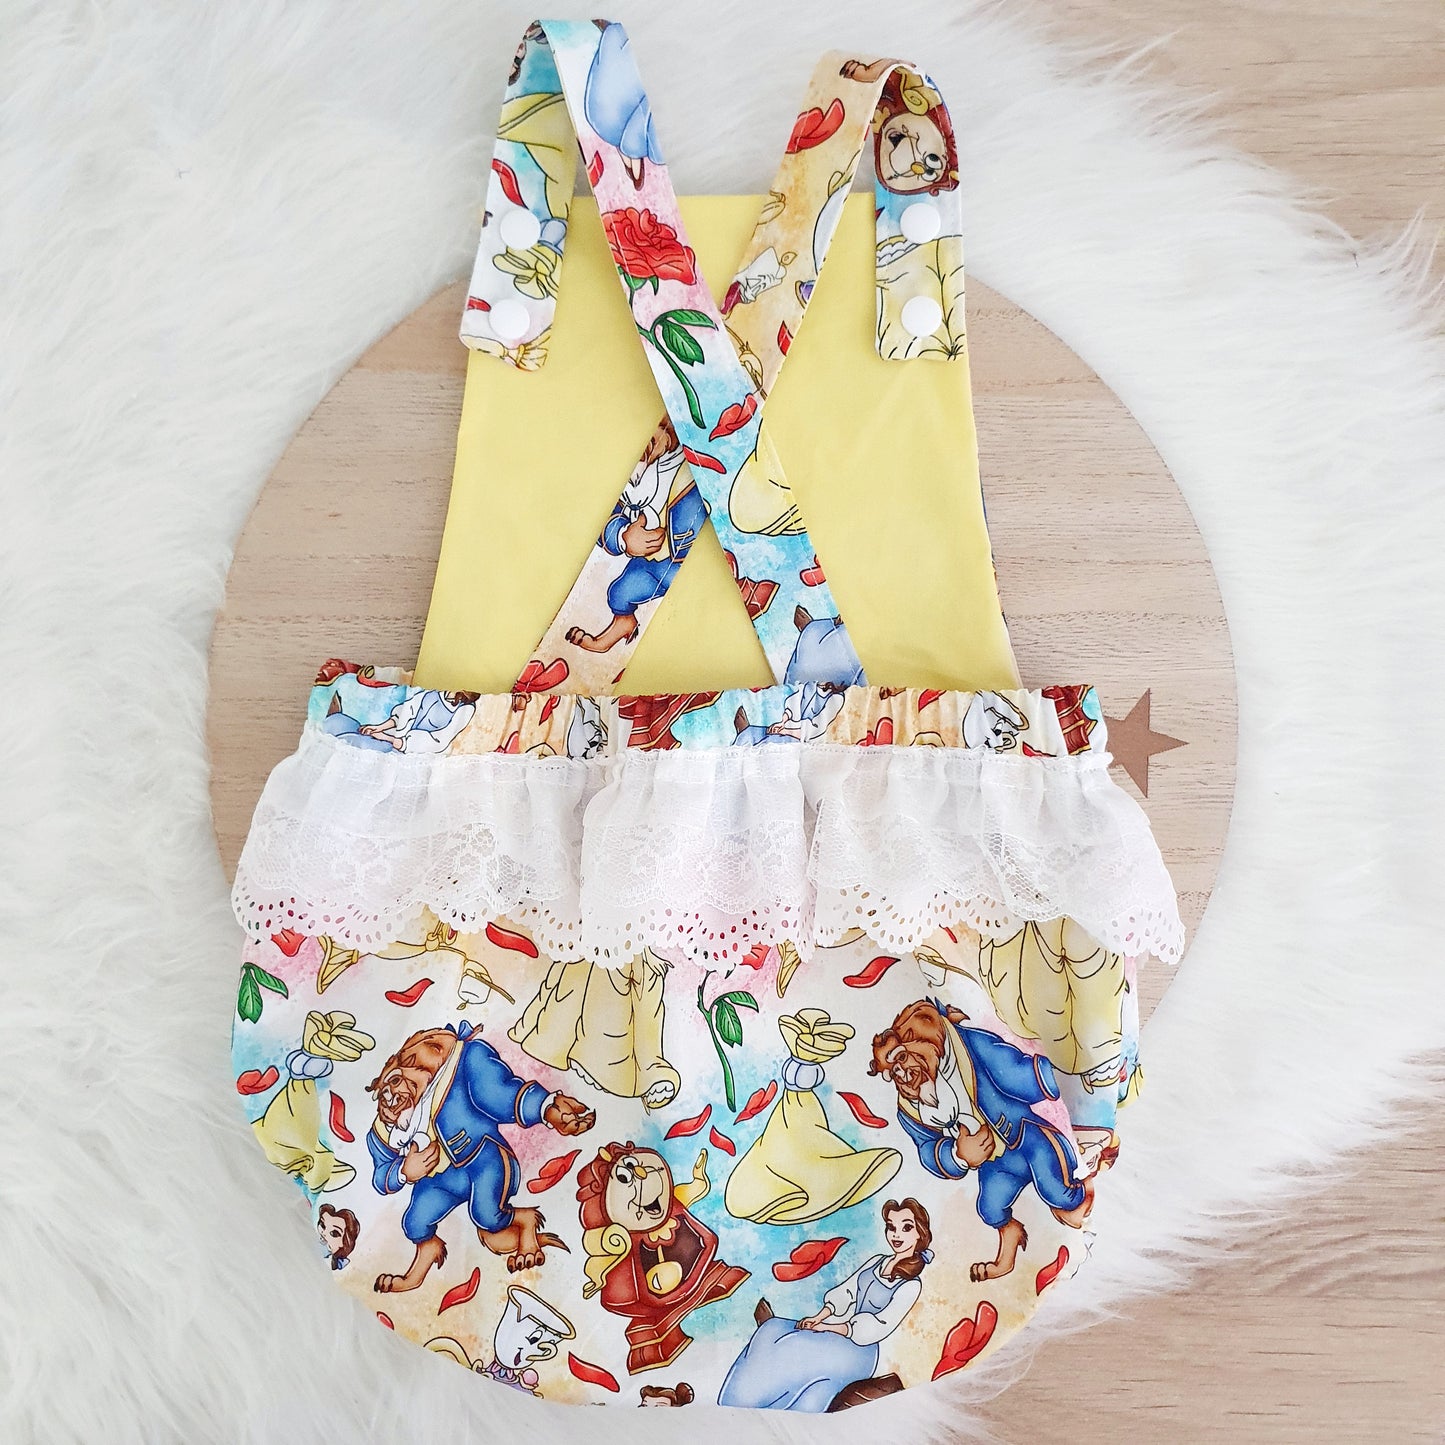 BELLE BEAUTY print Baby Romper with trim, Handmade Baby Clothing, Size 1 - 1st Birthday Clothing / Cake Smash Outfit, 12 - 18 months